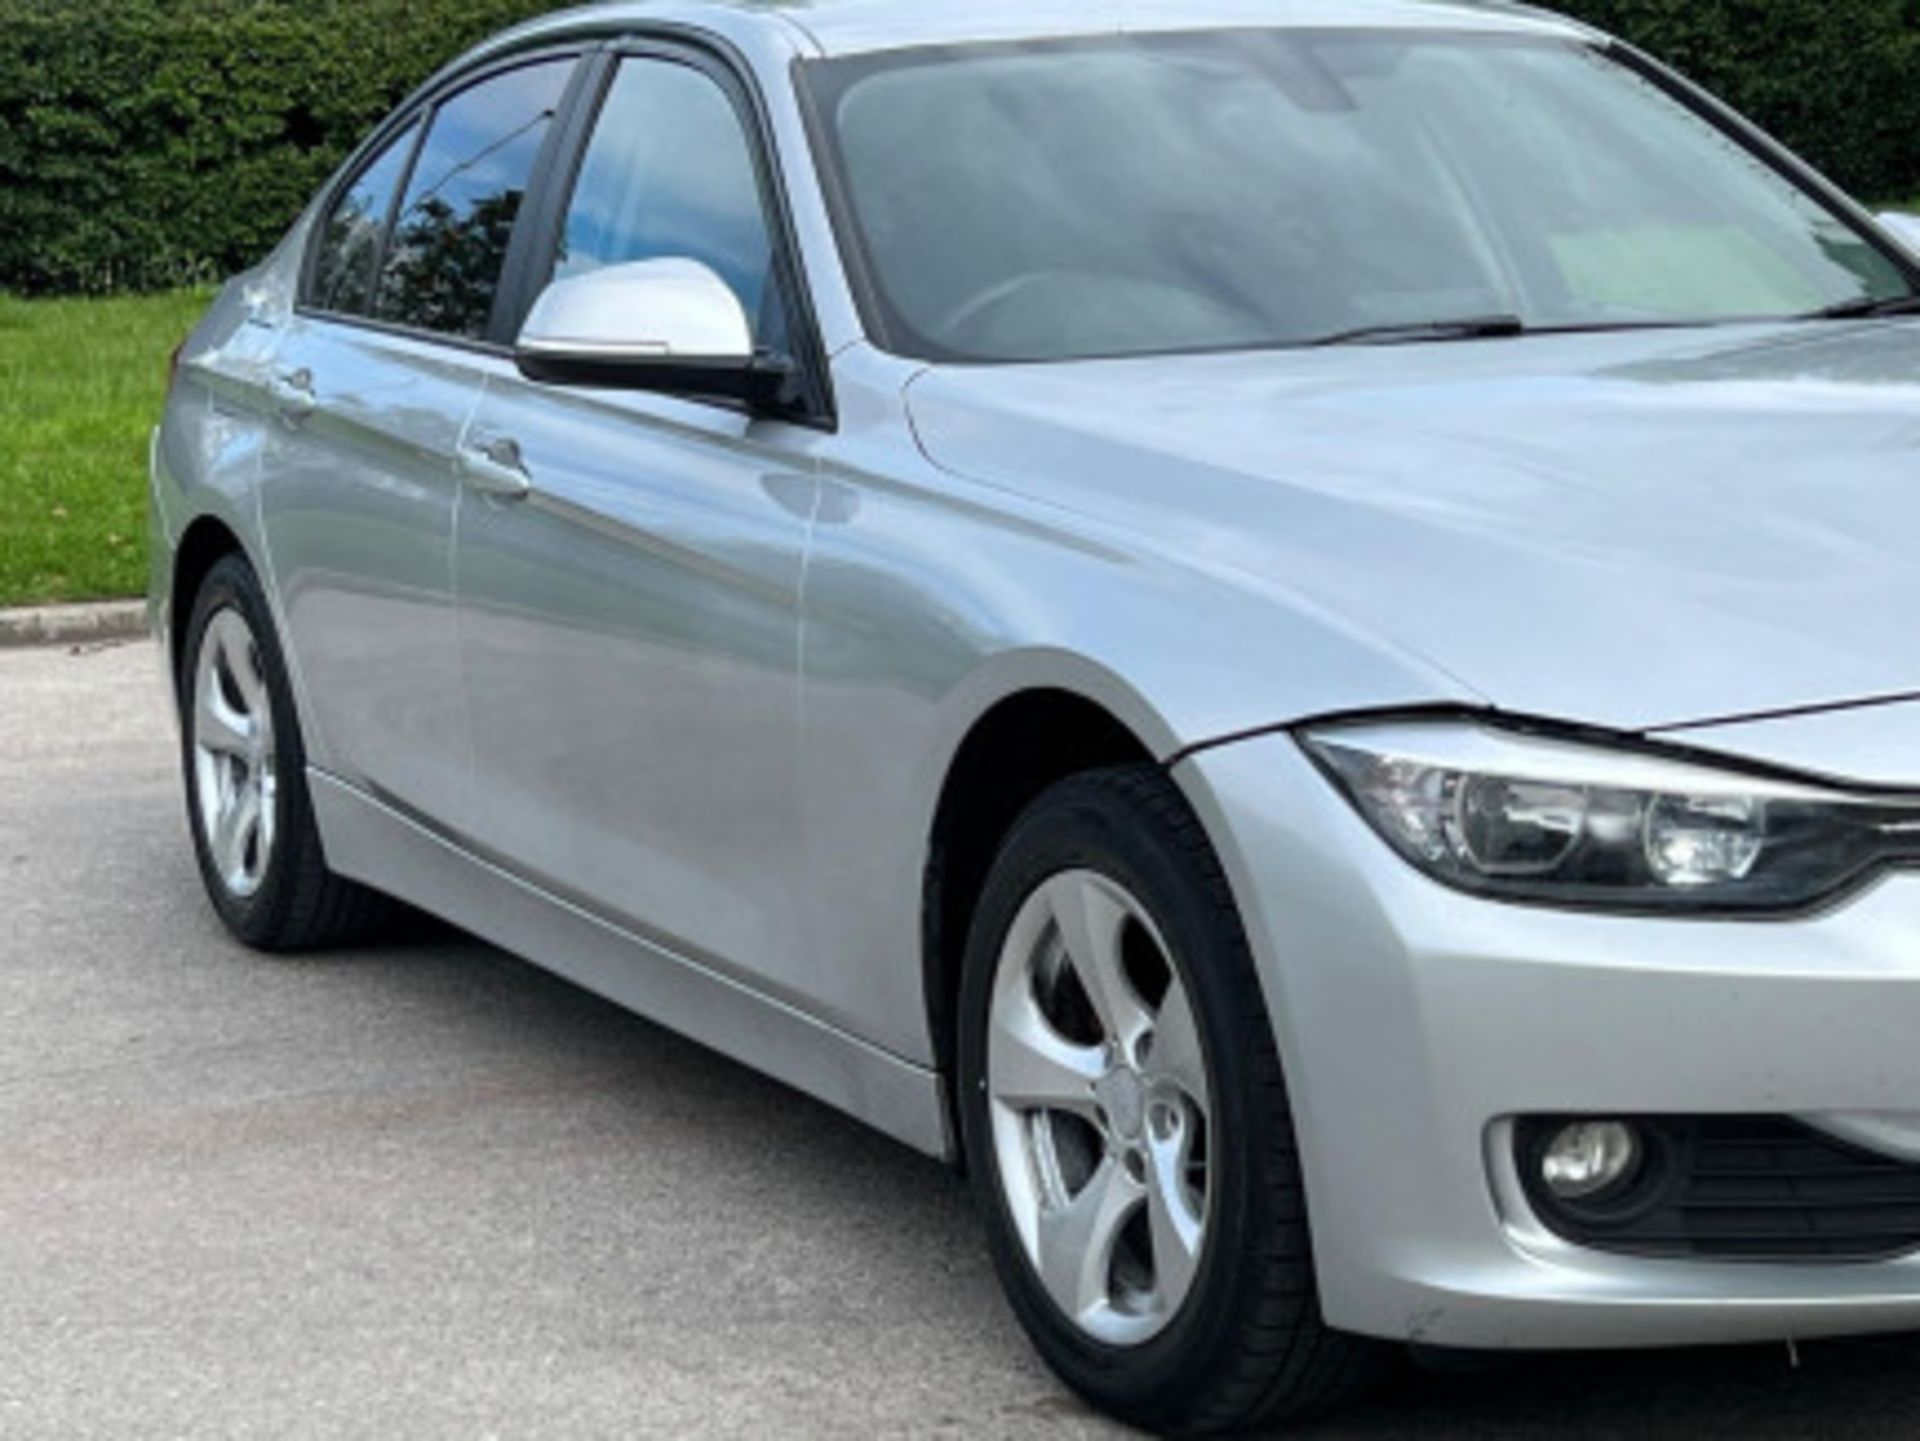 BMW 3 SERIES 2.0 DIESEL ED START STOP - A WELL-MAINTAINED GEM >>--NO VAT ON HAMMER--<< - Image 108 of 229